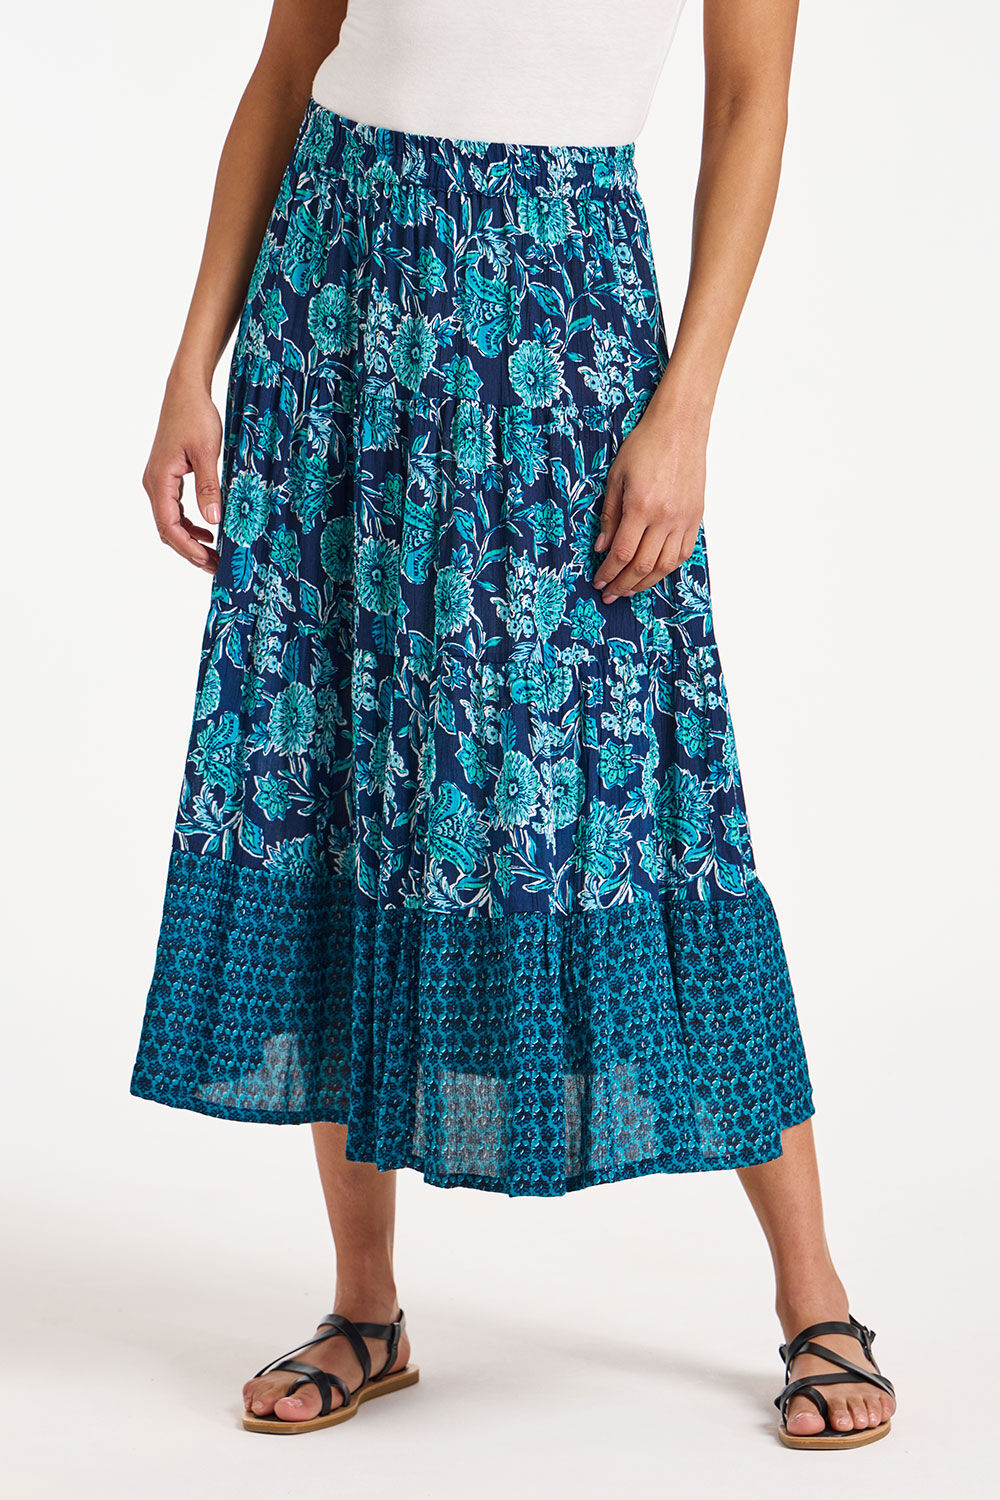 Bonmarche Turquoise Border Print Tiered Crinkle Skirt, Size: 20